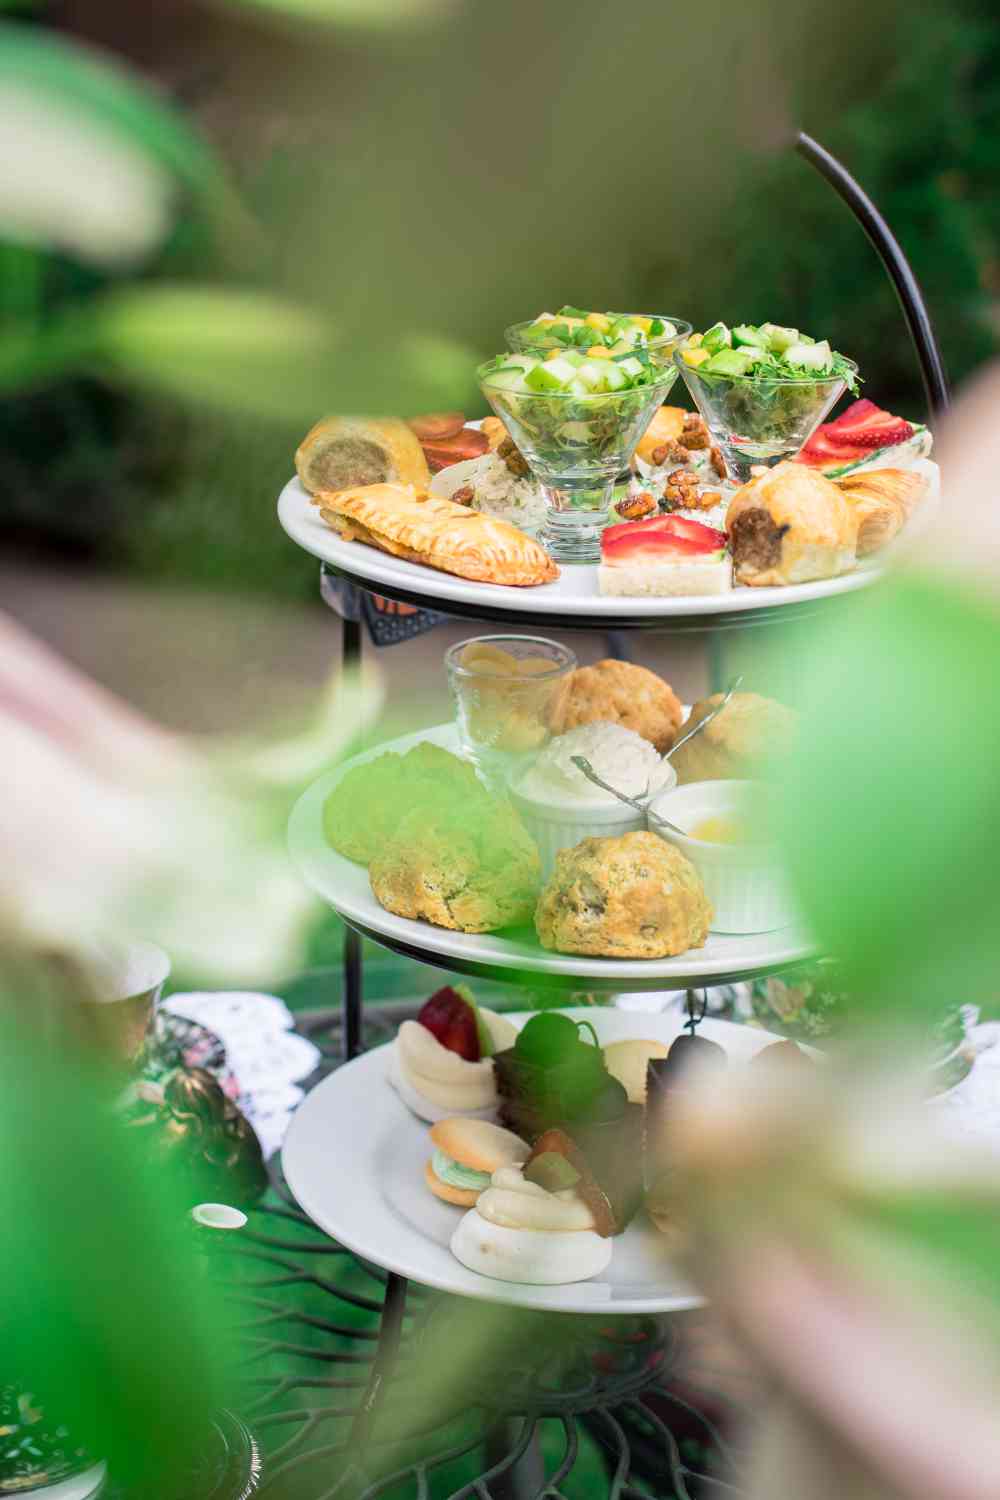 Afternoon Tea Menu - A Neverland Adventure - Dine in Tray Through the Leaves